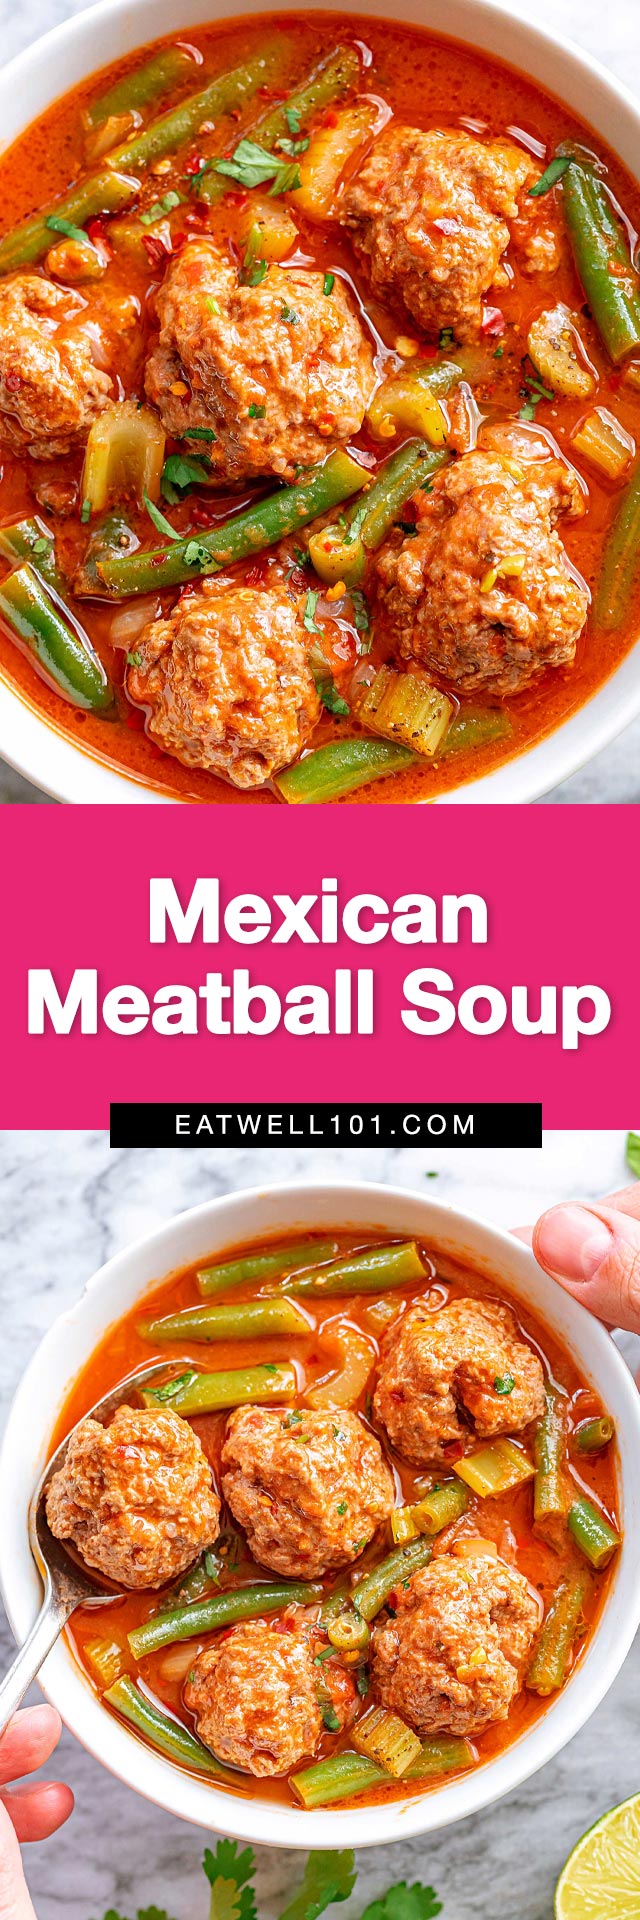 Mexican meatball soup - #meatball #soup #recipe #mexican #eatwell101 -  Loaded with veggies and tender spiced beef meatballs. Full of bold flavors and super satisfying, this meatball soup recipe is a fantastic weeknight dinner!